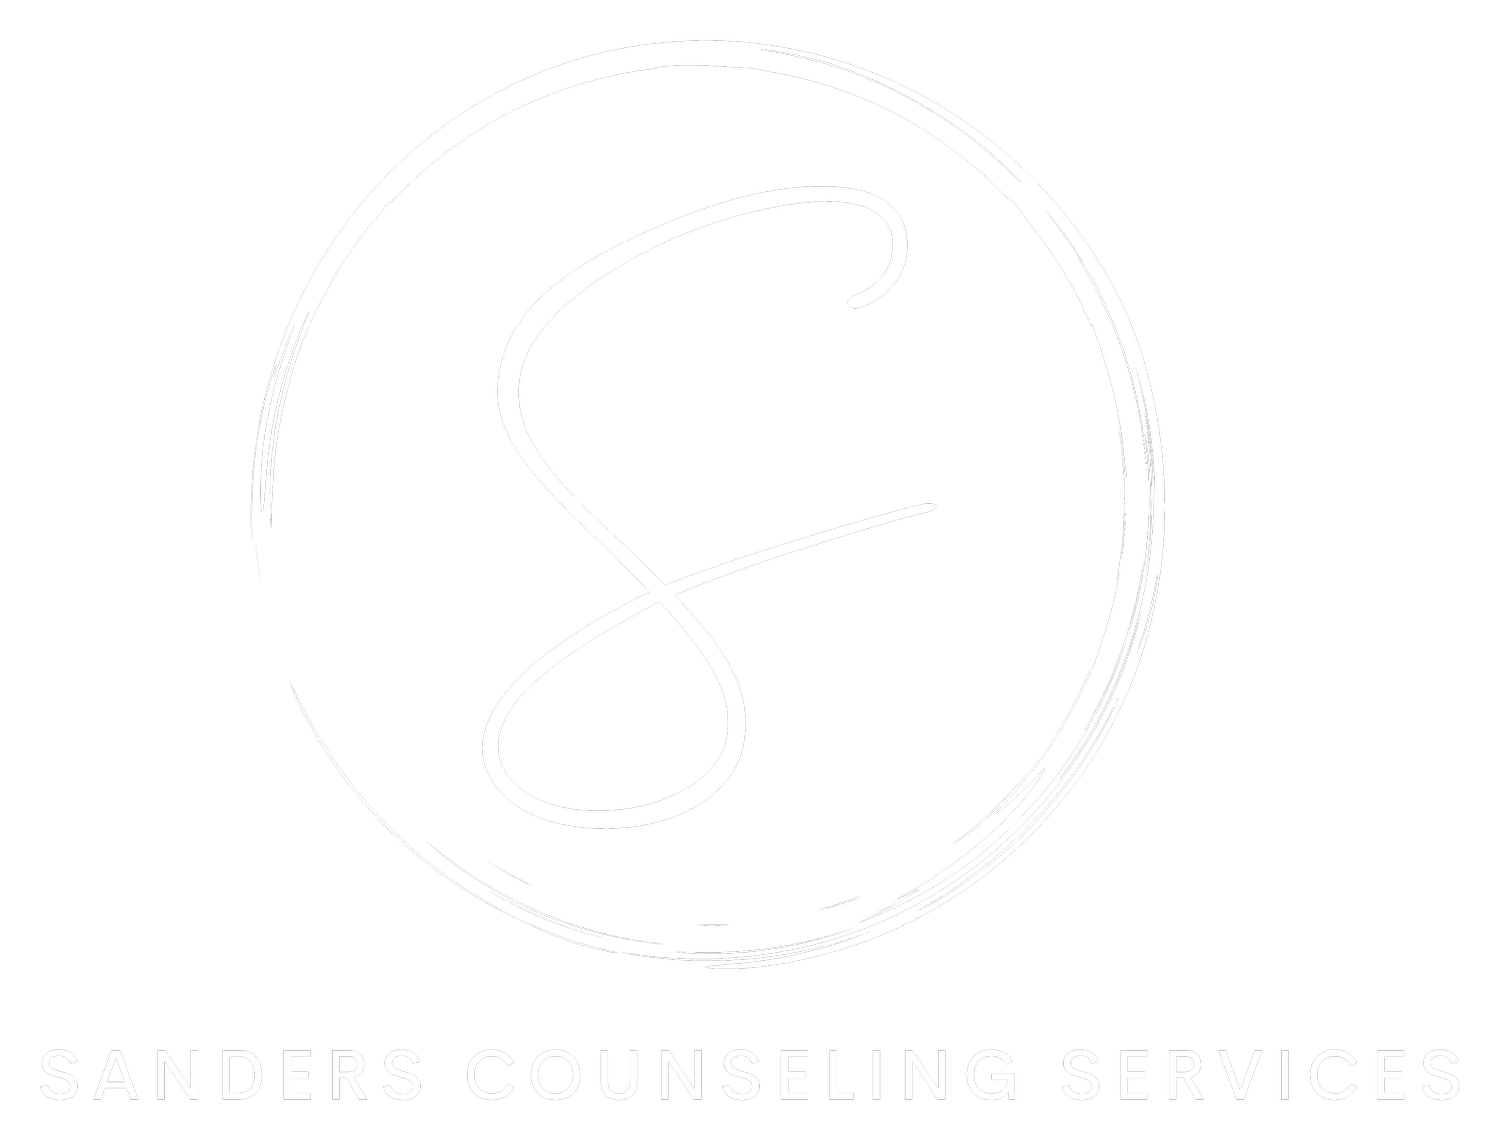 Sanders Counseling Services